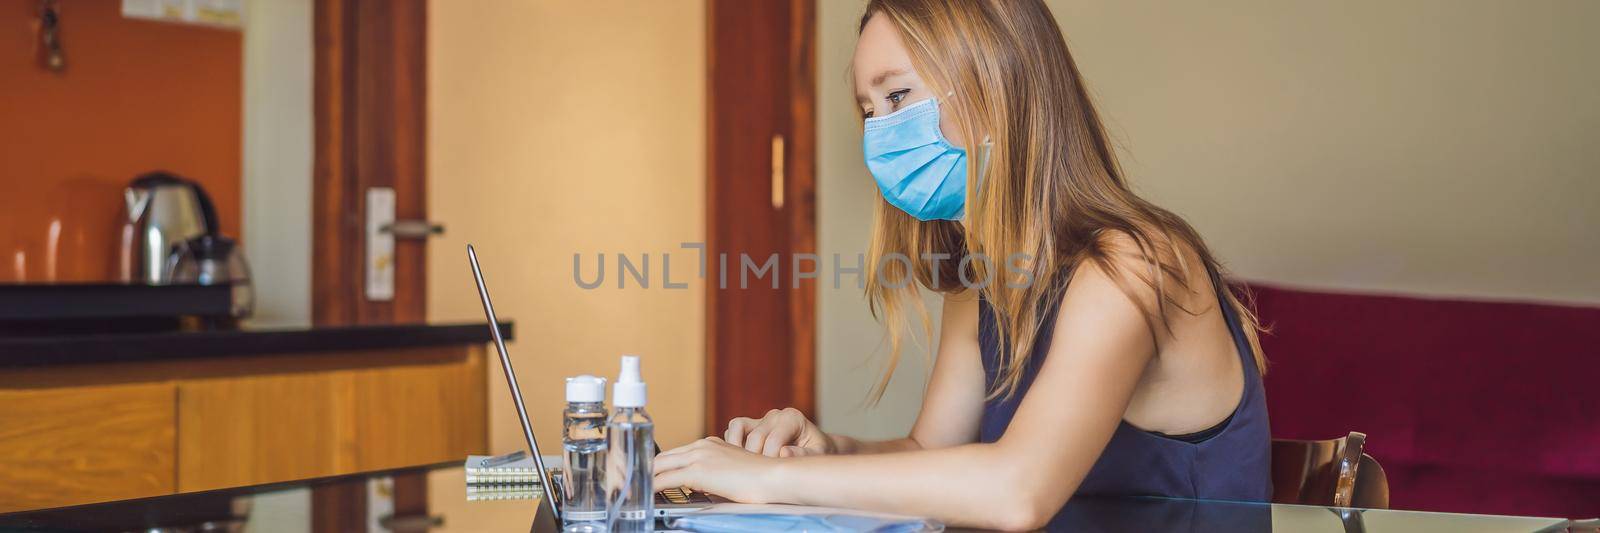 Coronavirus. Young business woman working from home wearing protective mask. Business woman in quarantine for coronavirus wearing protective mask. Working from home BANNER, LONG FORMAT by galitskaya